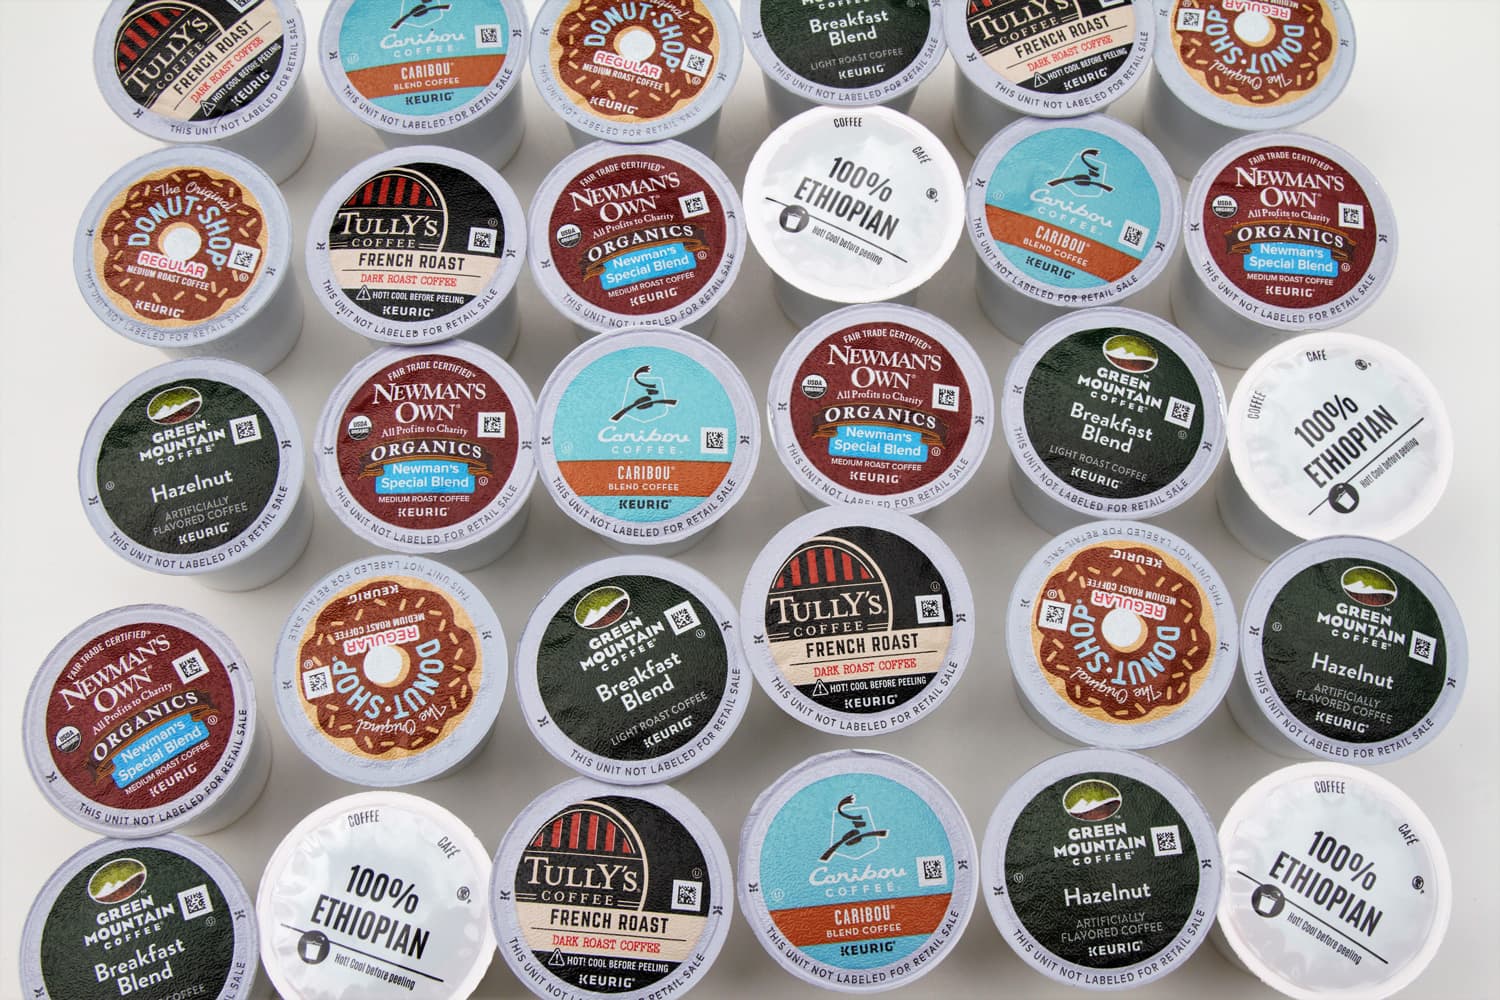 Various brands of coffee pods for Keurig single cup coffee makers